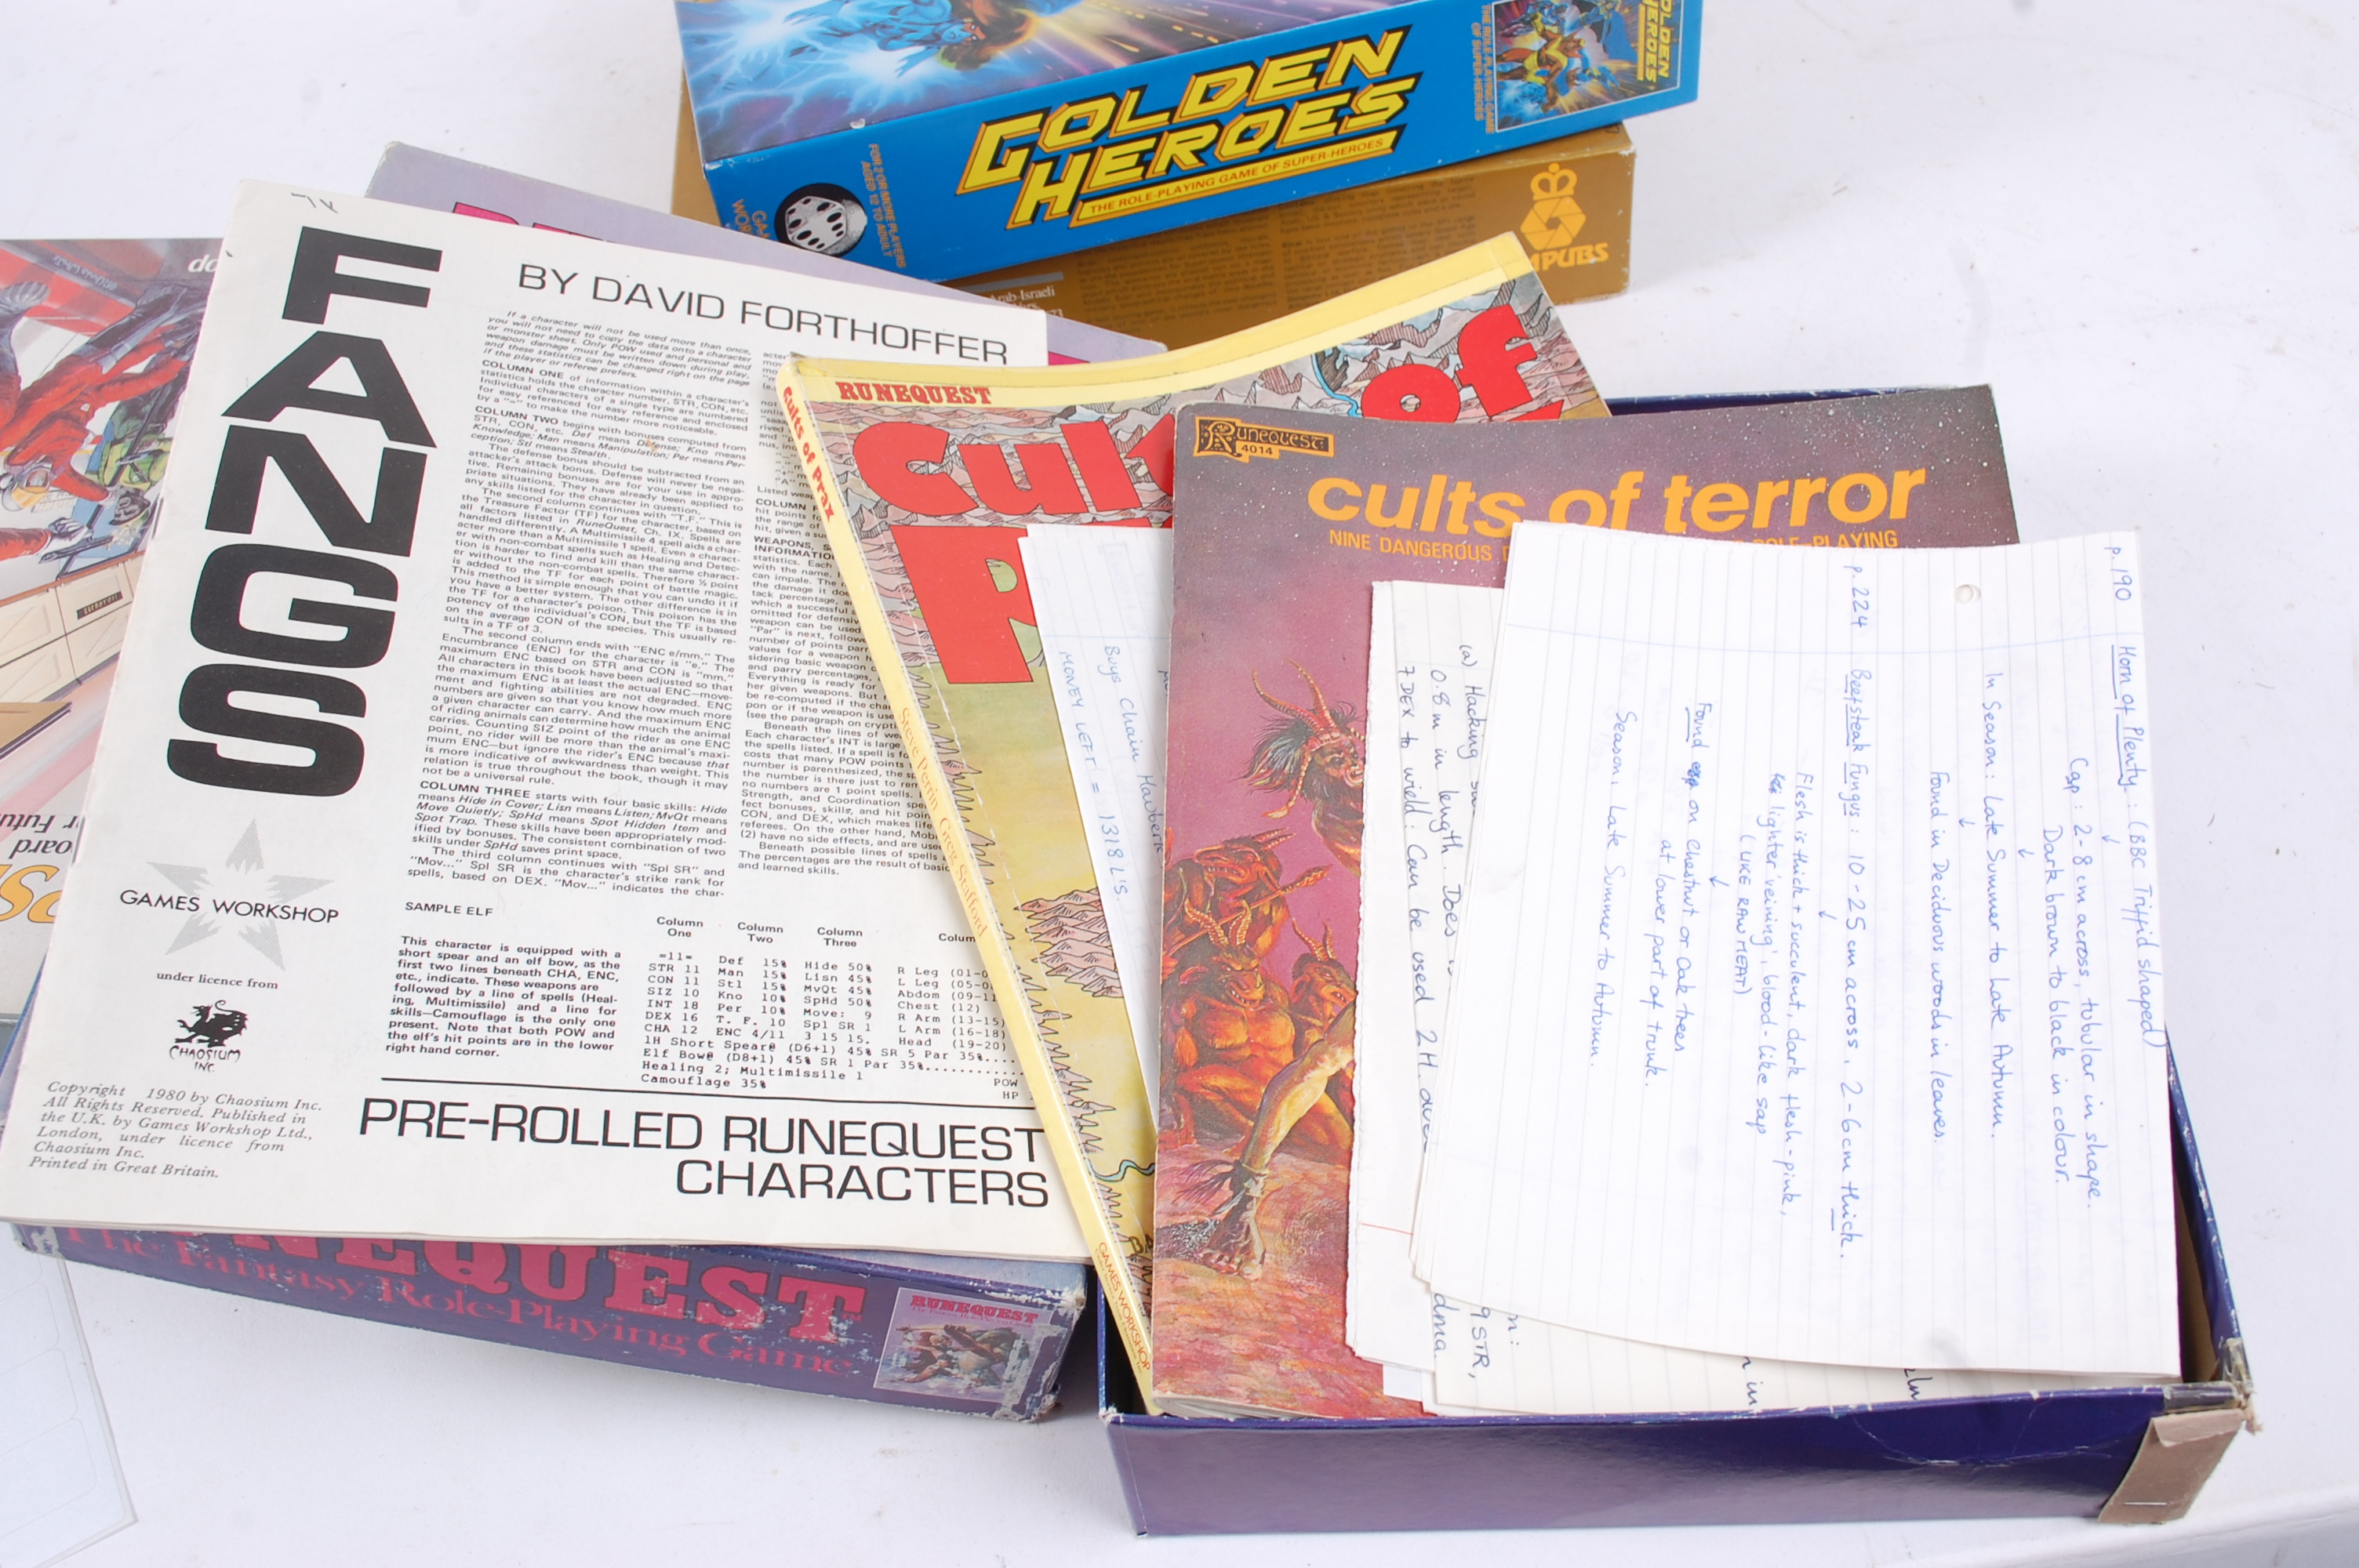 ROLE PLAYING GAMES; A collection of 5x vintage boxed role playing games - Sinai, Runequest, - Image 3 of 3